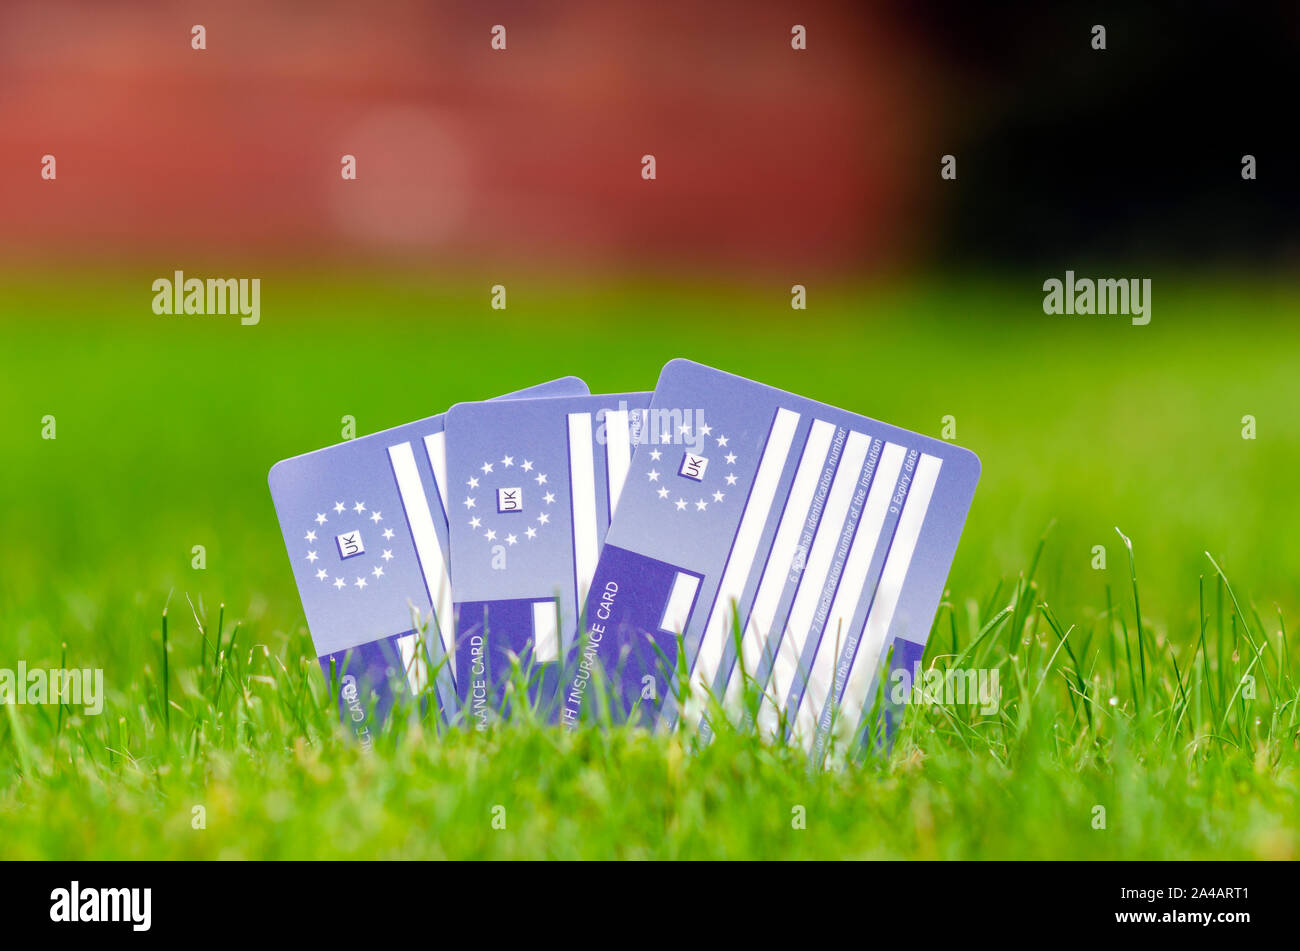 Three European Health Insurance Cards on the grass. The EHIC card covers you against illness or injury in Europe. Stock Photo